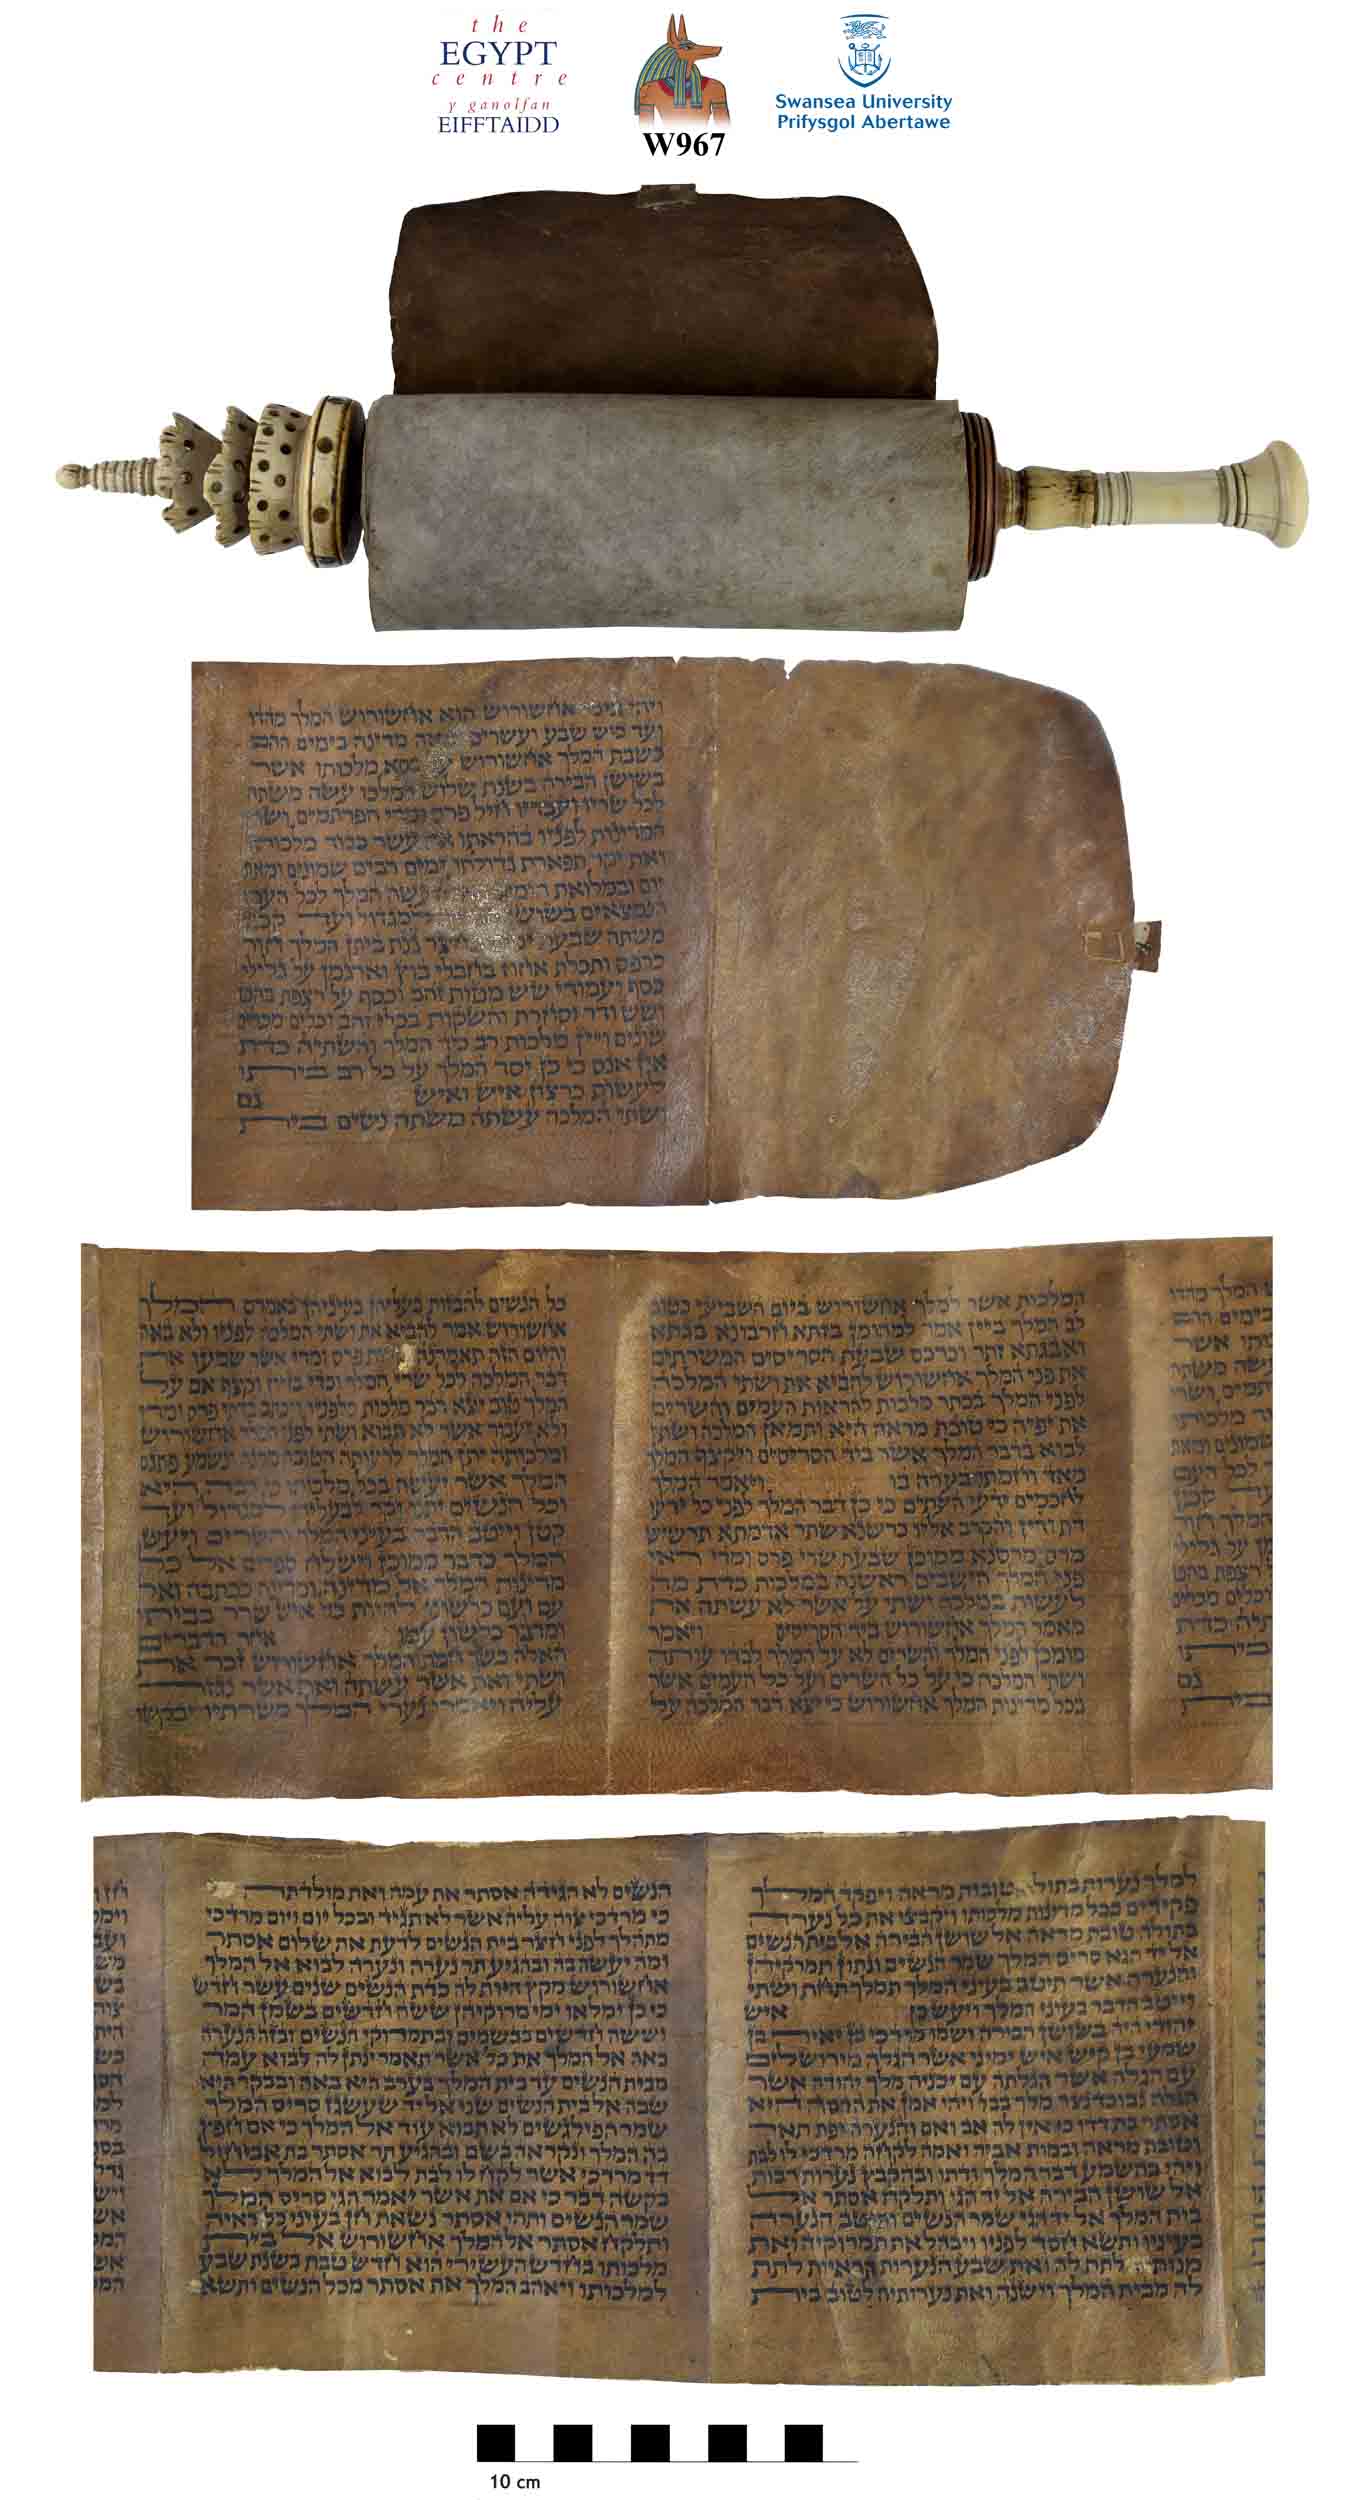 Image for: Parchment scroll